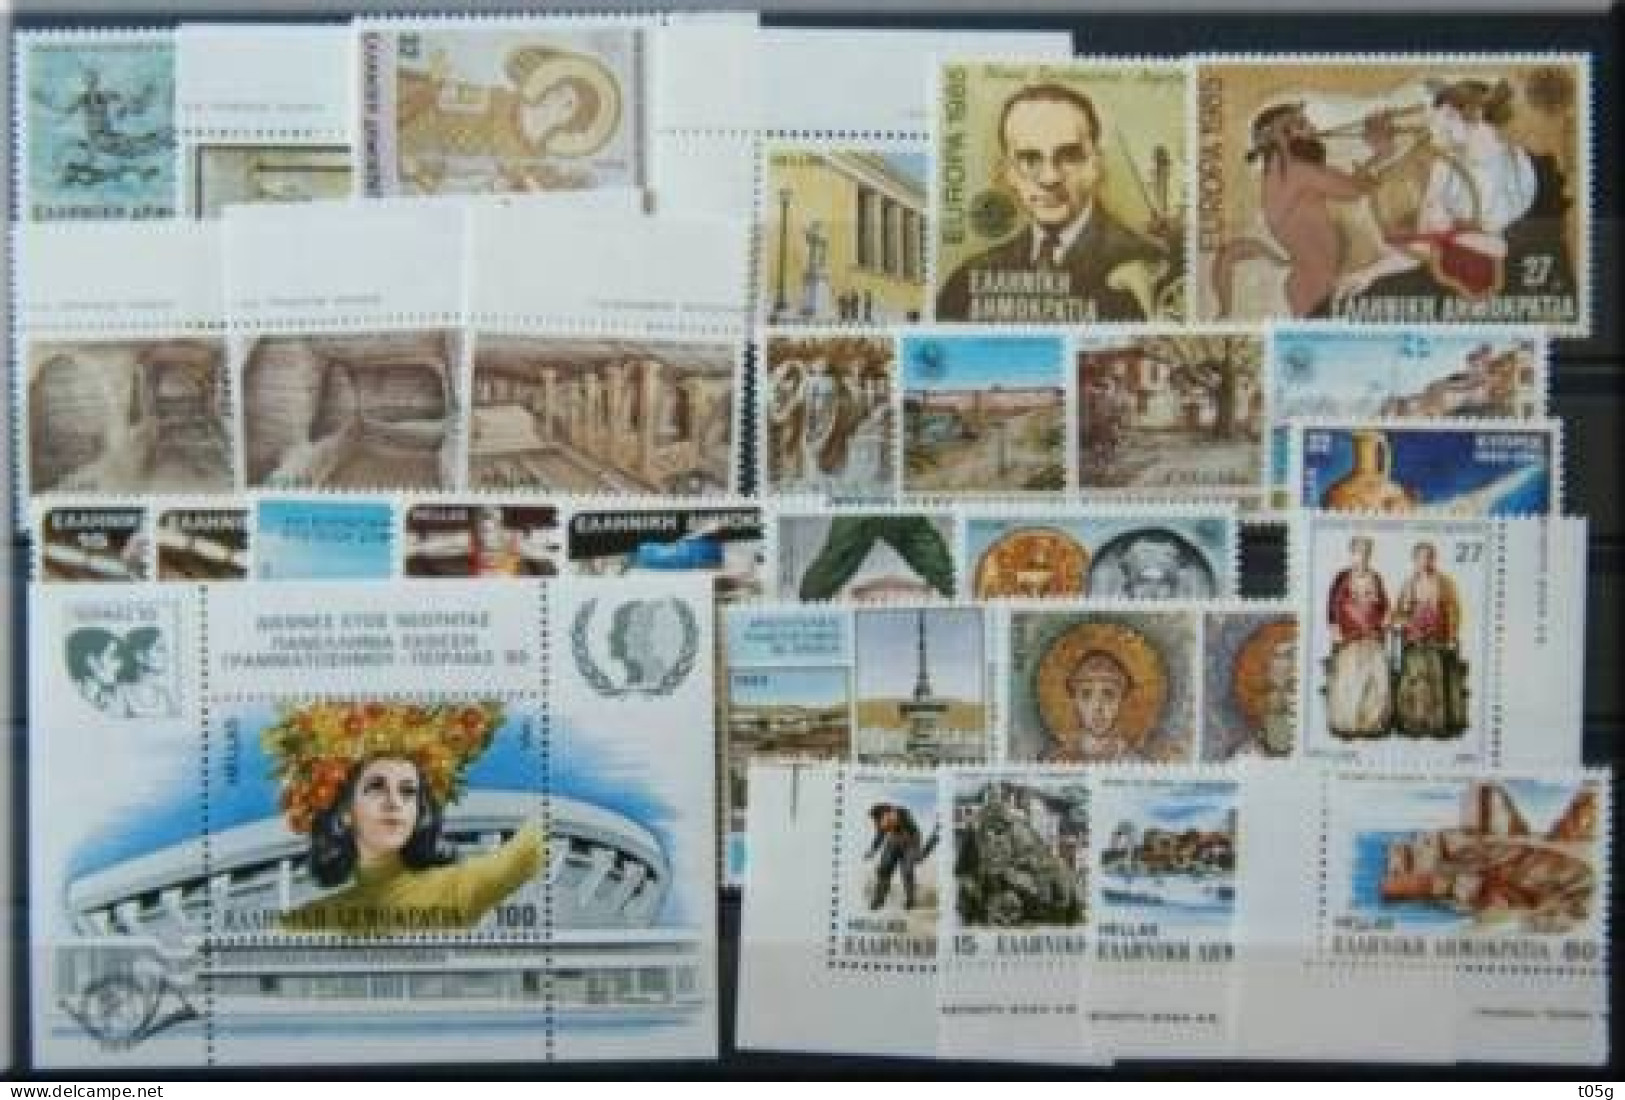 GREECE - GREECE-HELLAS 1985:  Compl. Year  MNH** - Unused Stamps